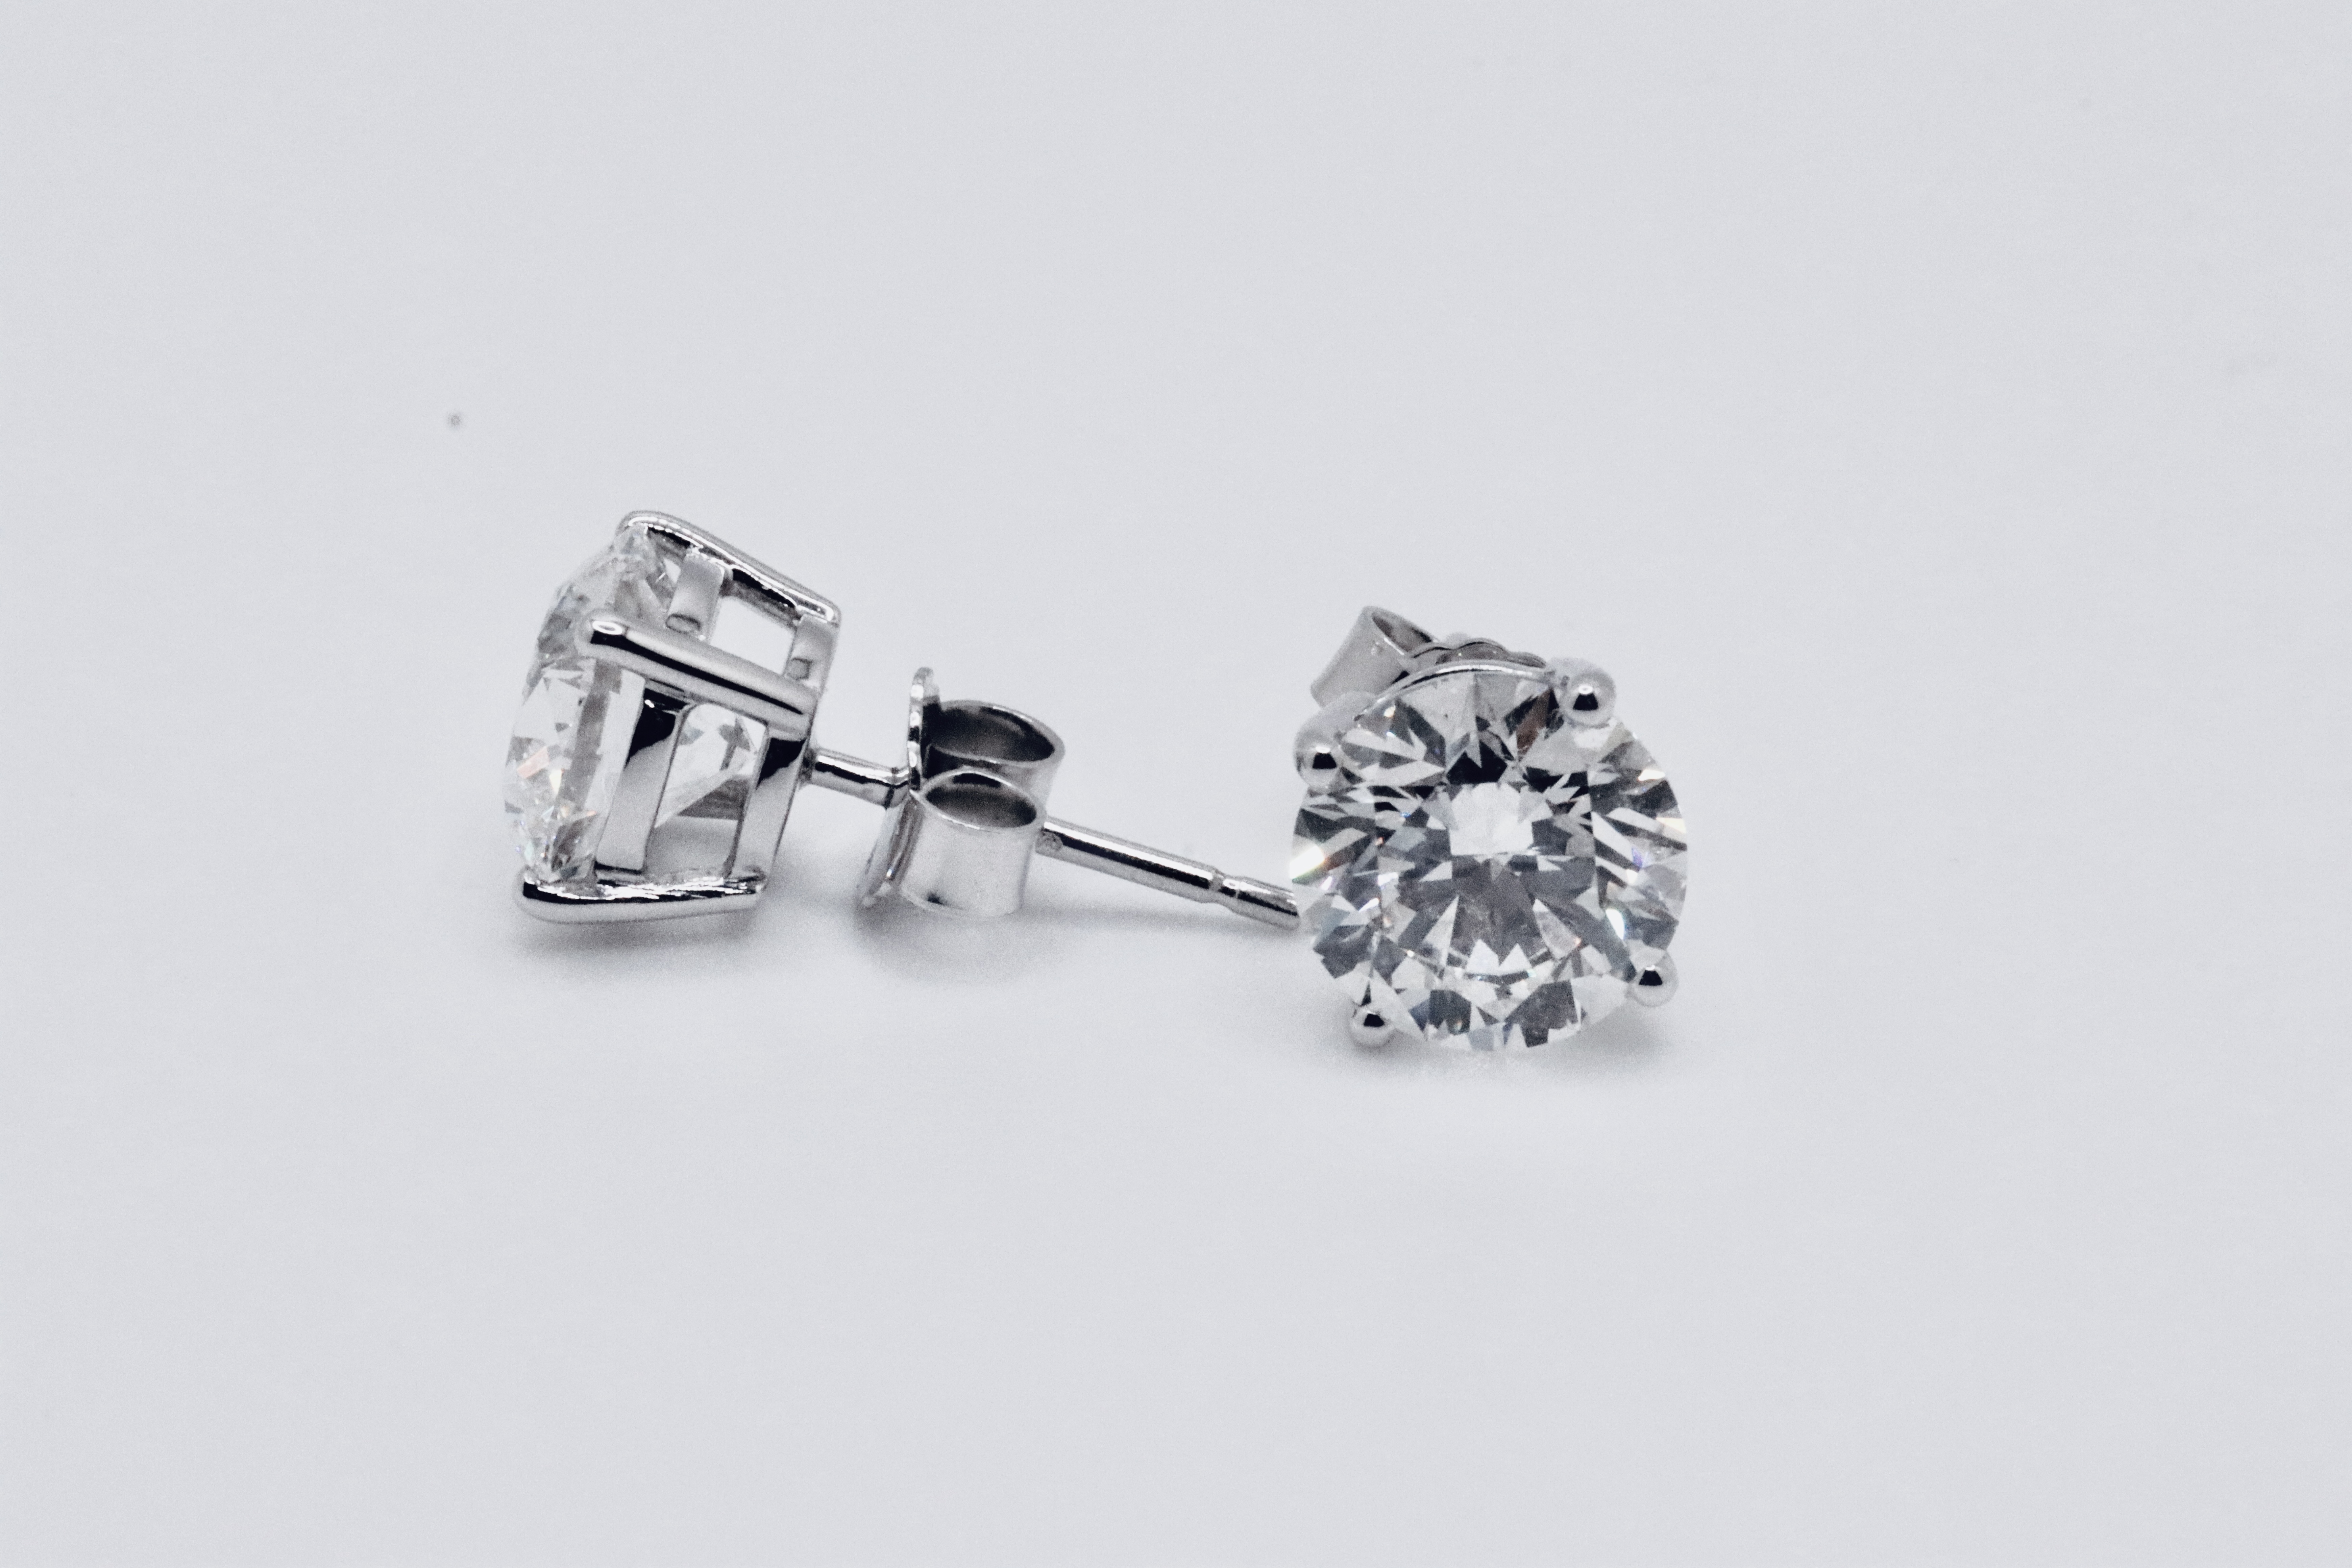 ** ON SALE ** Round Brilliant Cut 2.00 Carat Diamond Earrings Set in 18kt Gold - F Colour VVS - GIA - Image 3 of 4